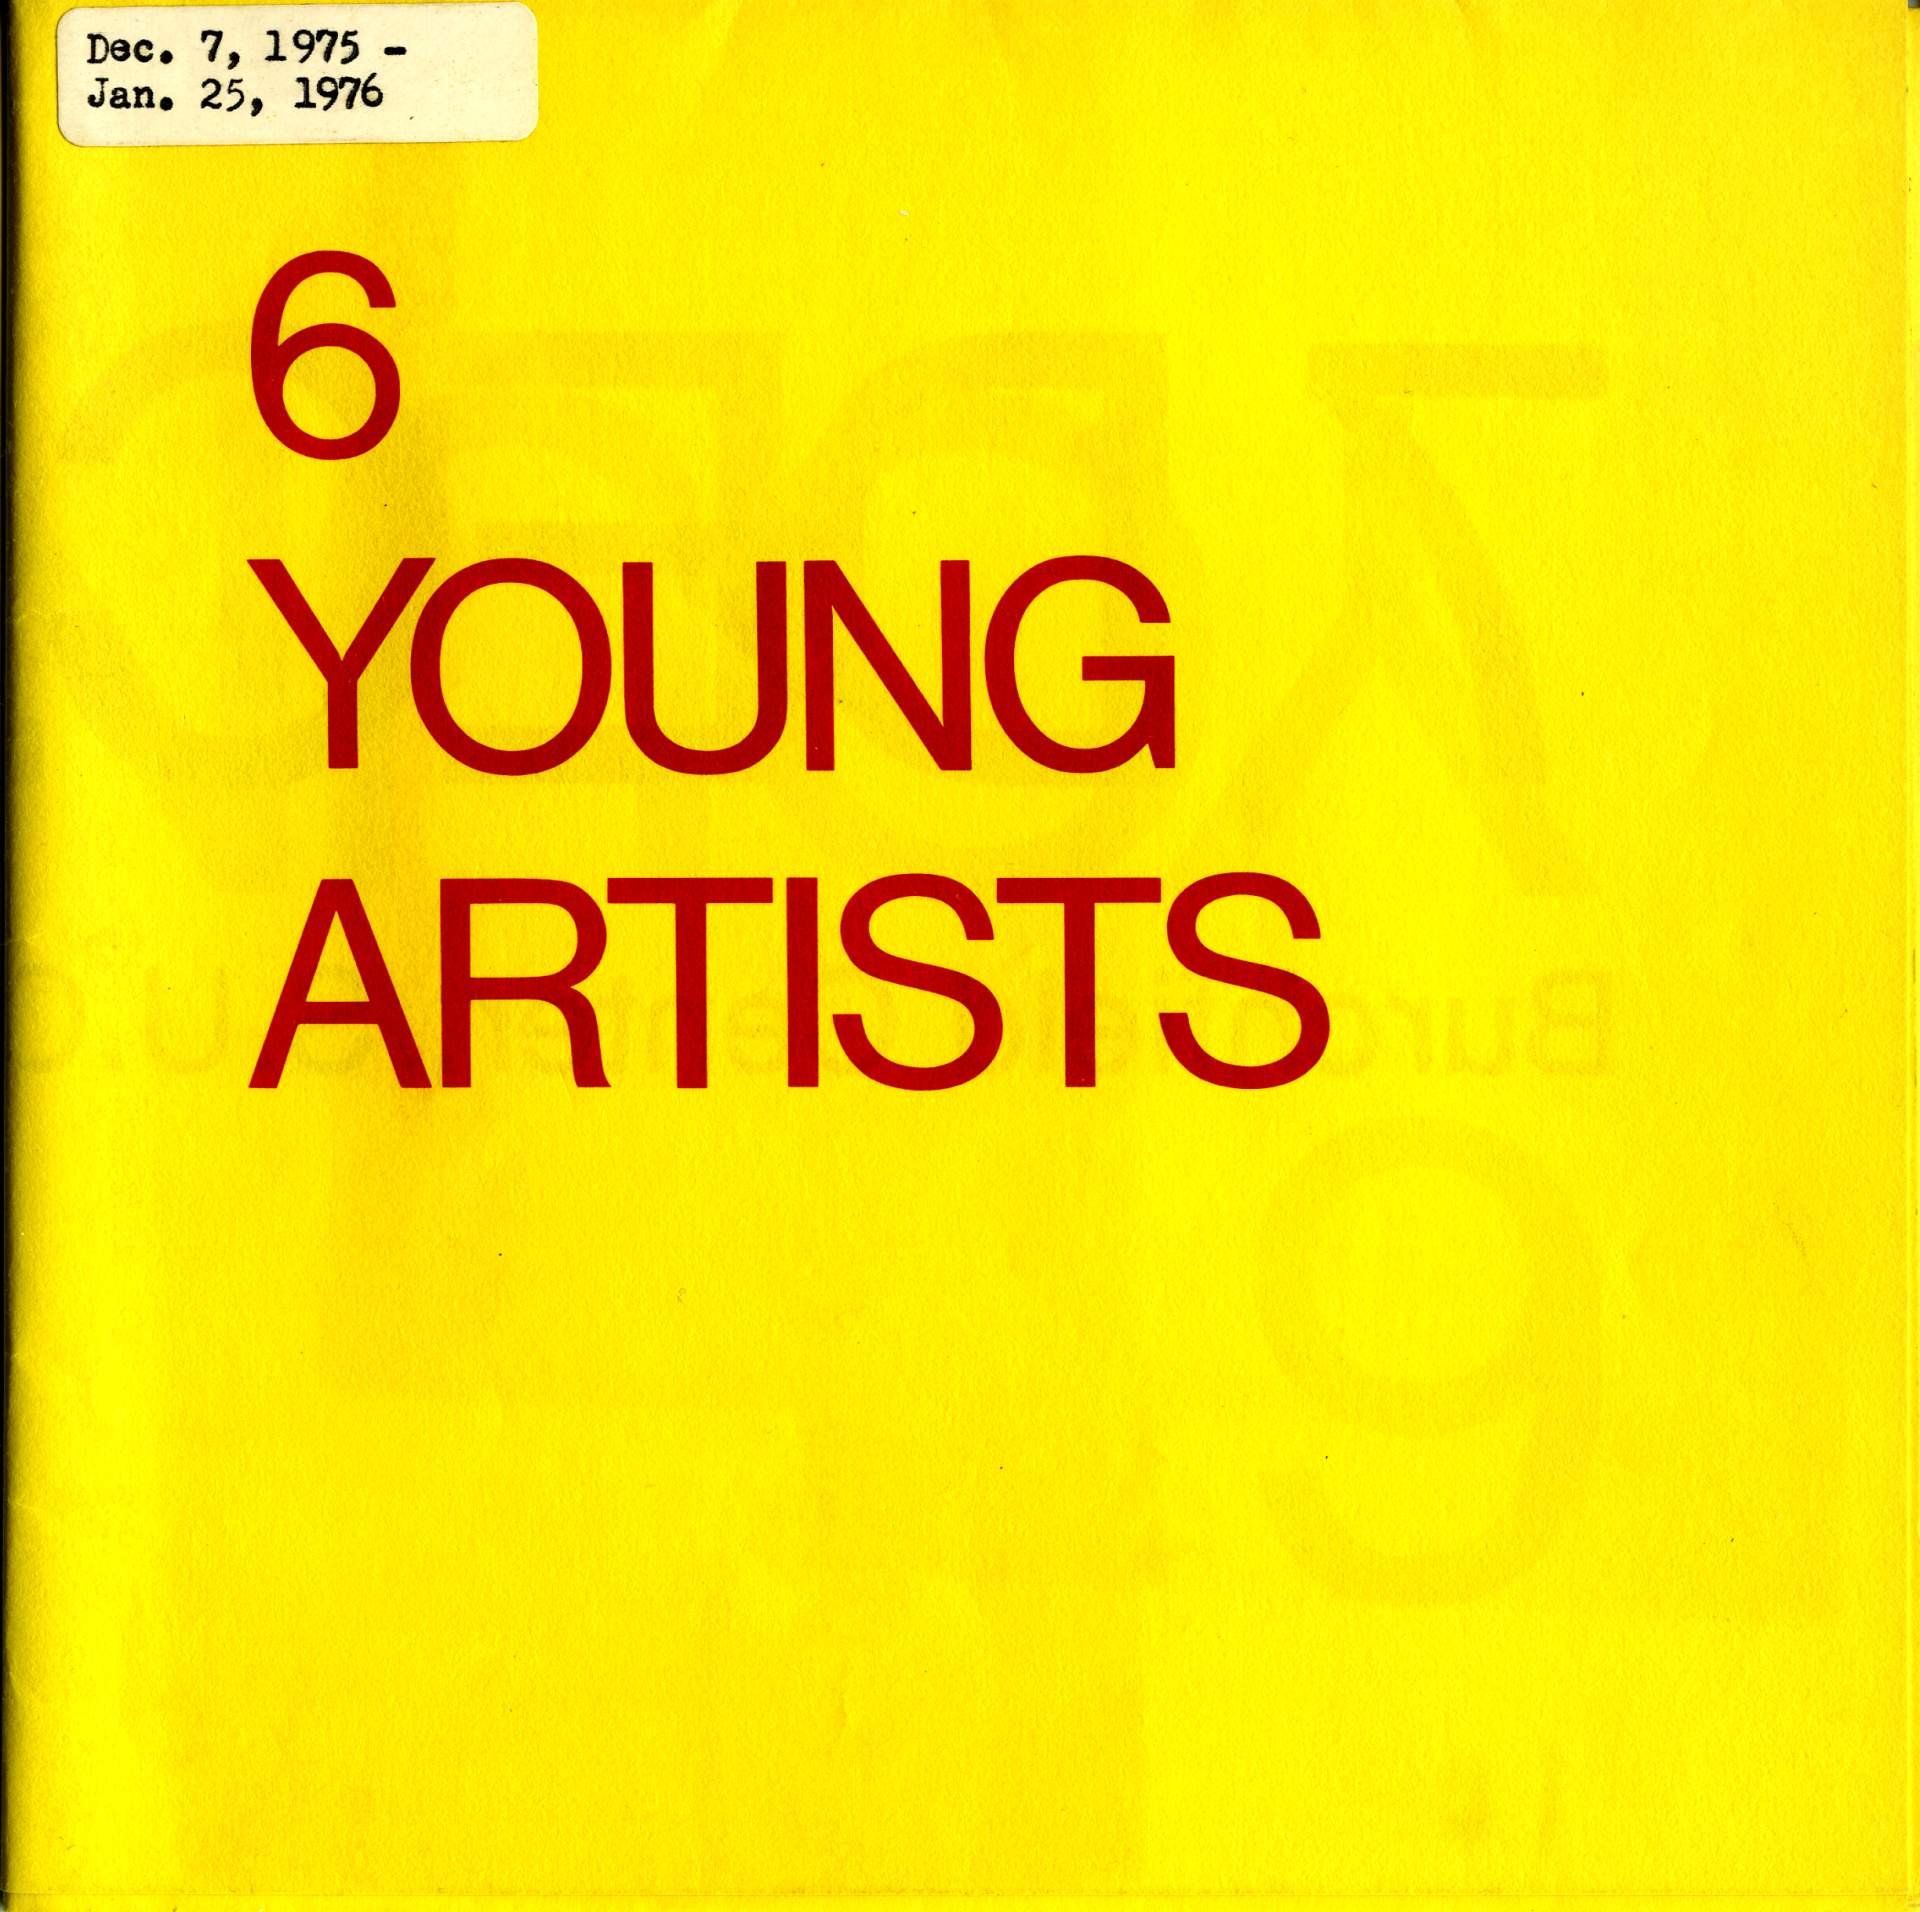 6 Young Artists, cover of exhibition program